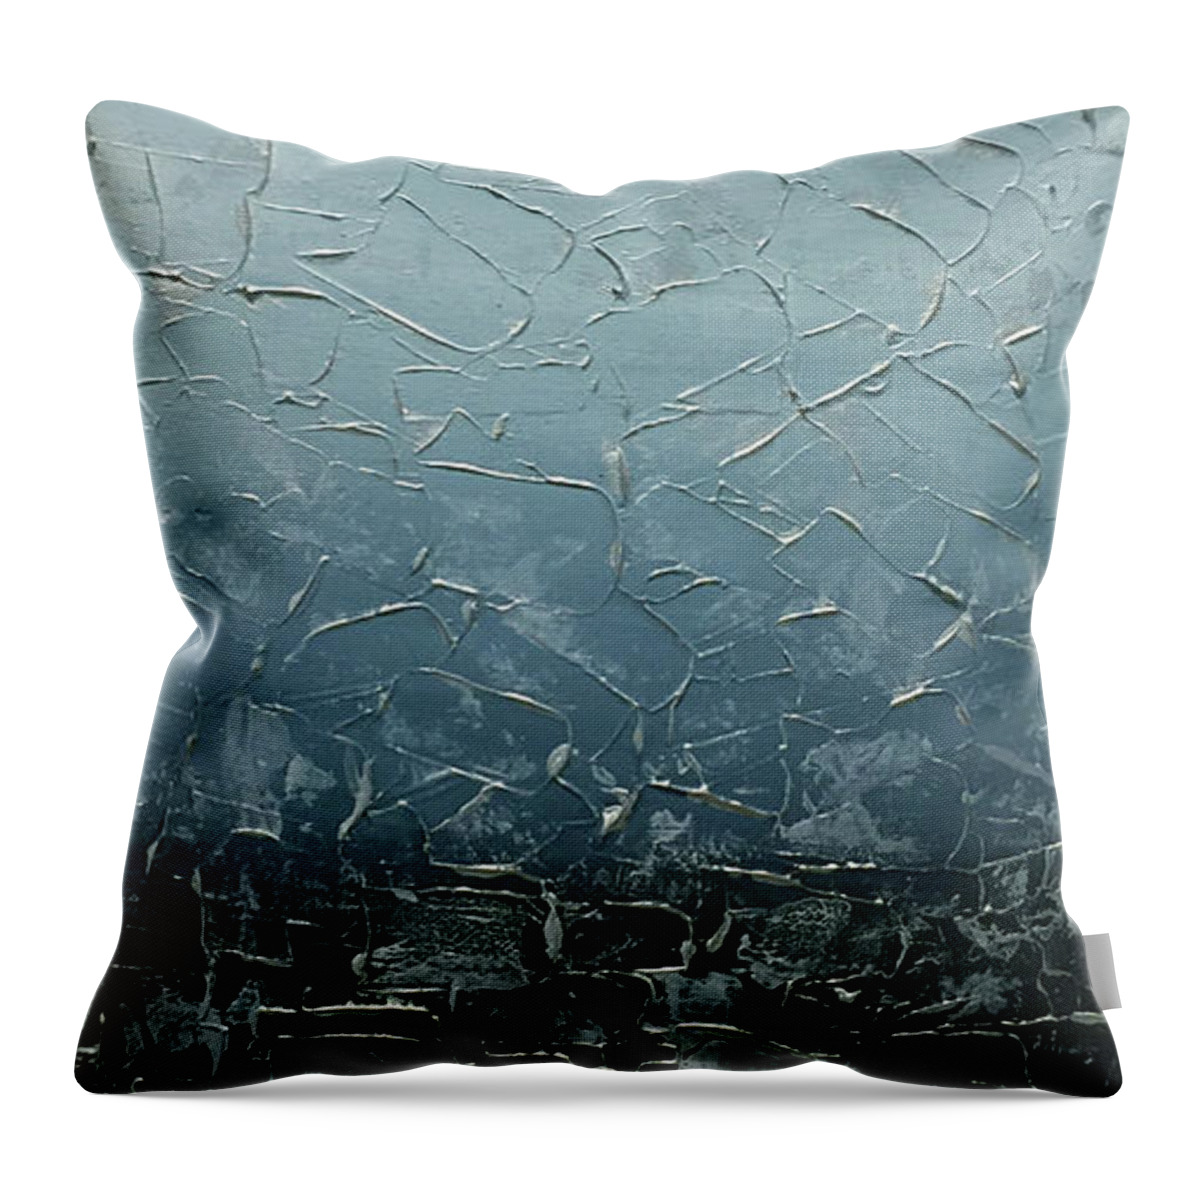 Moon Throw Pillow featuring the mixed media Moonlight by Linda Bailey